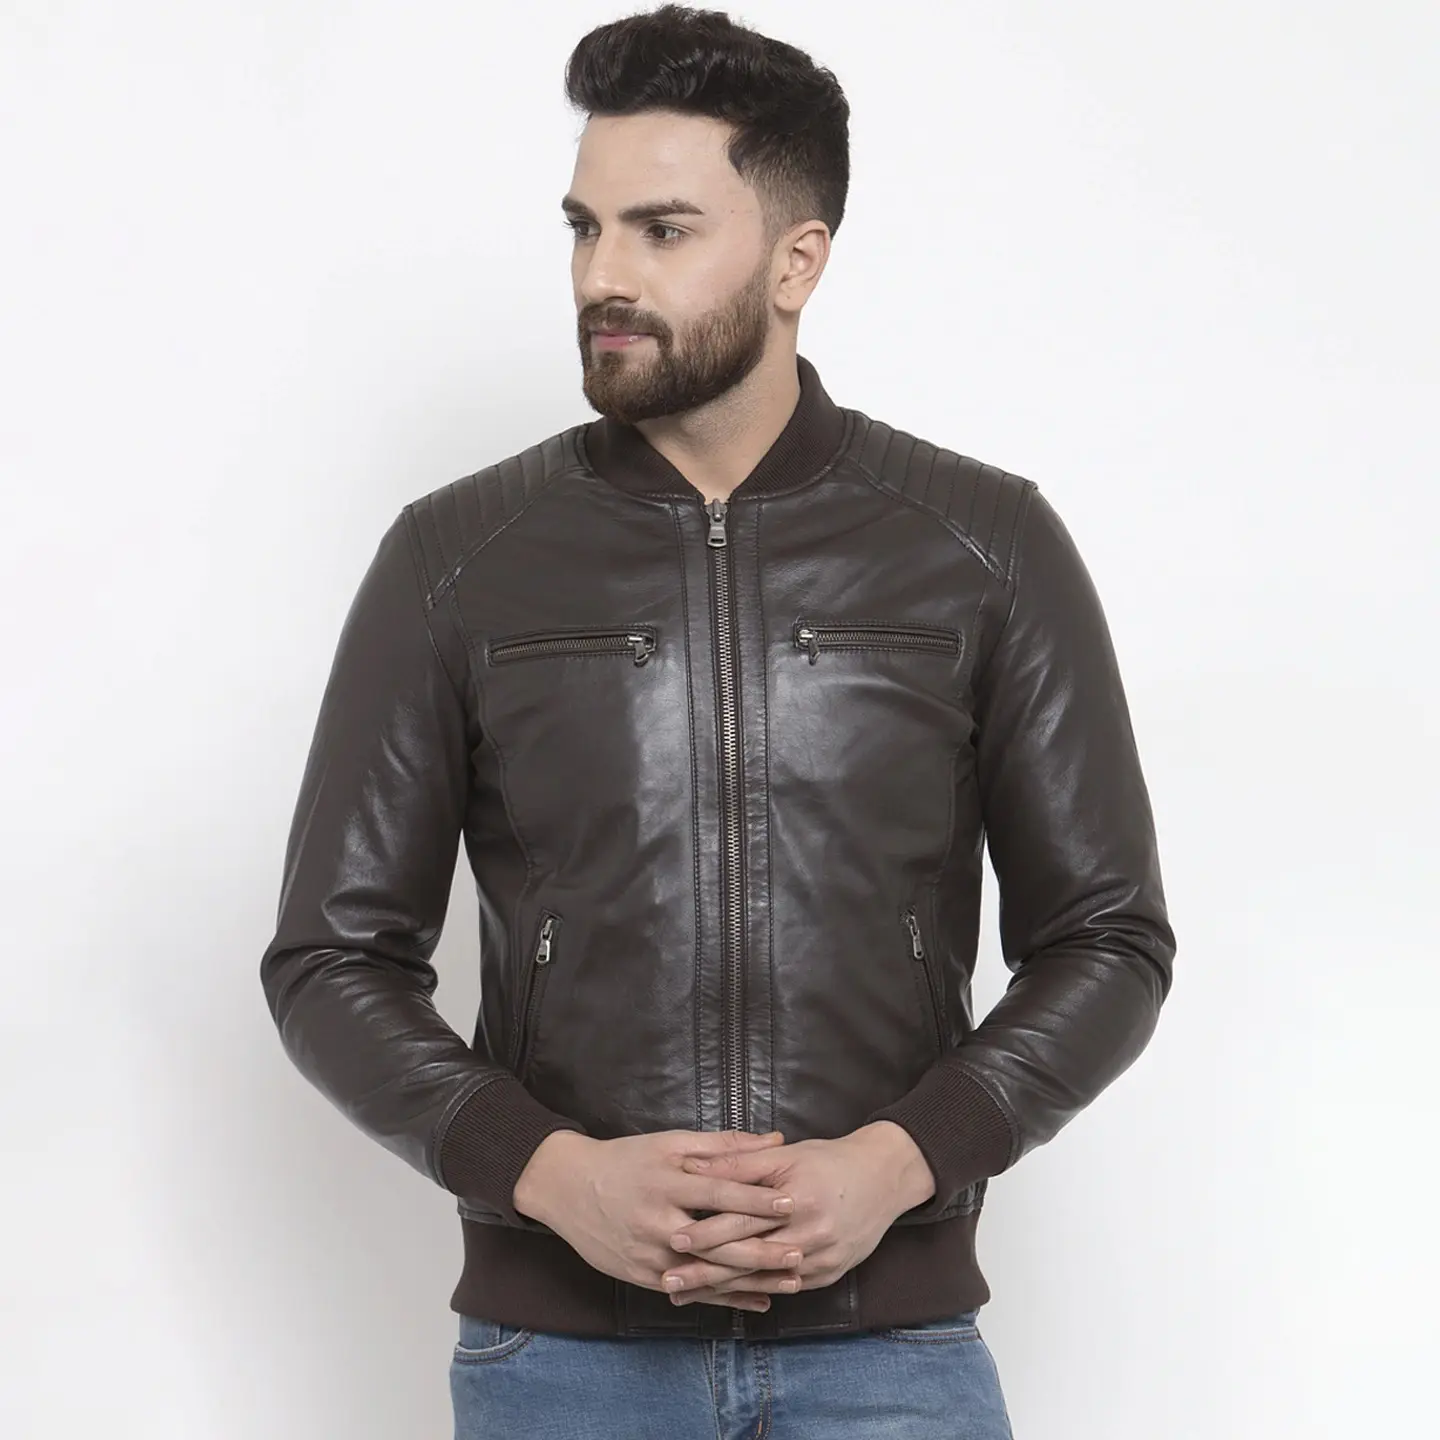 2022 Fashion Men's Leather Jackets Autumn Solid Color Jacket Popular Simple Casual Male Jacket